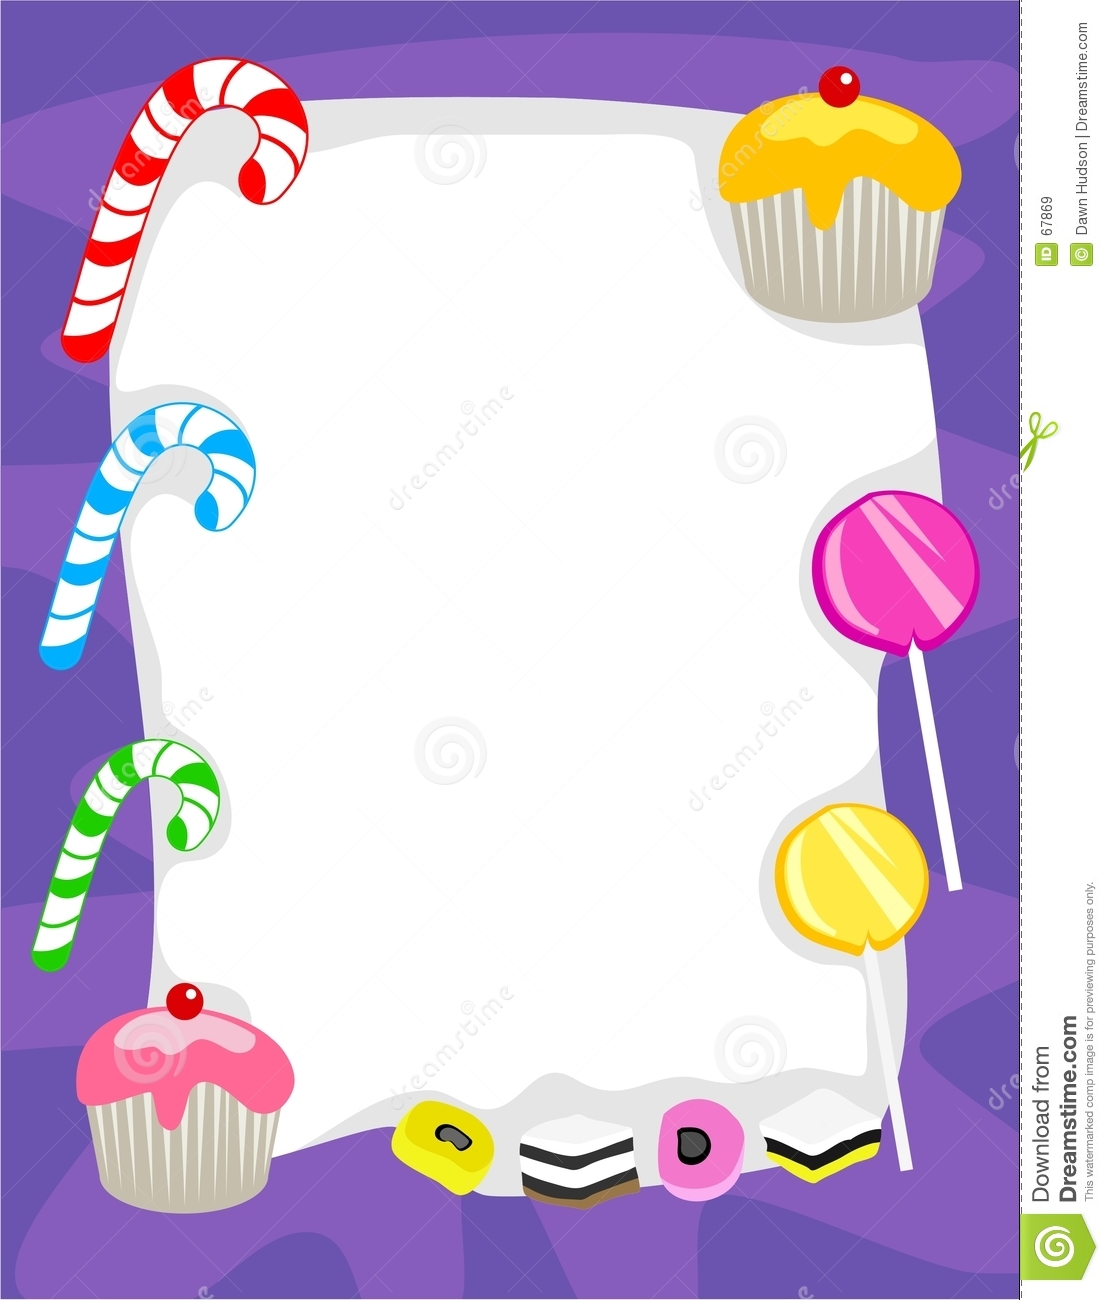 Candy Cane Borders And Edges Stock Photos Image Auto Design